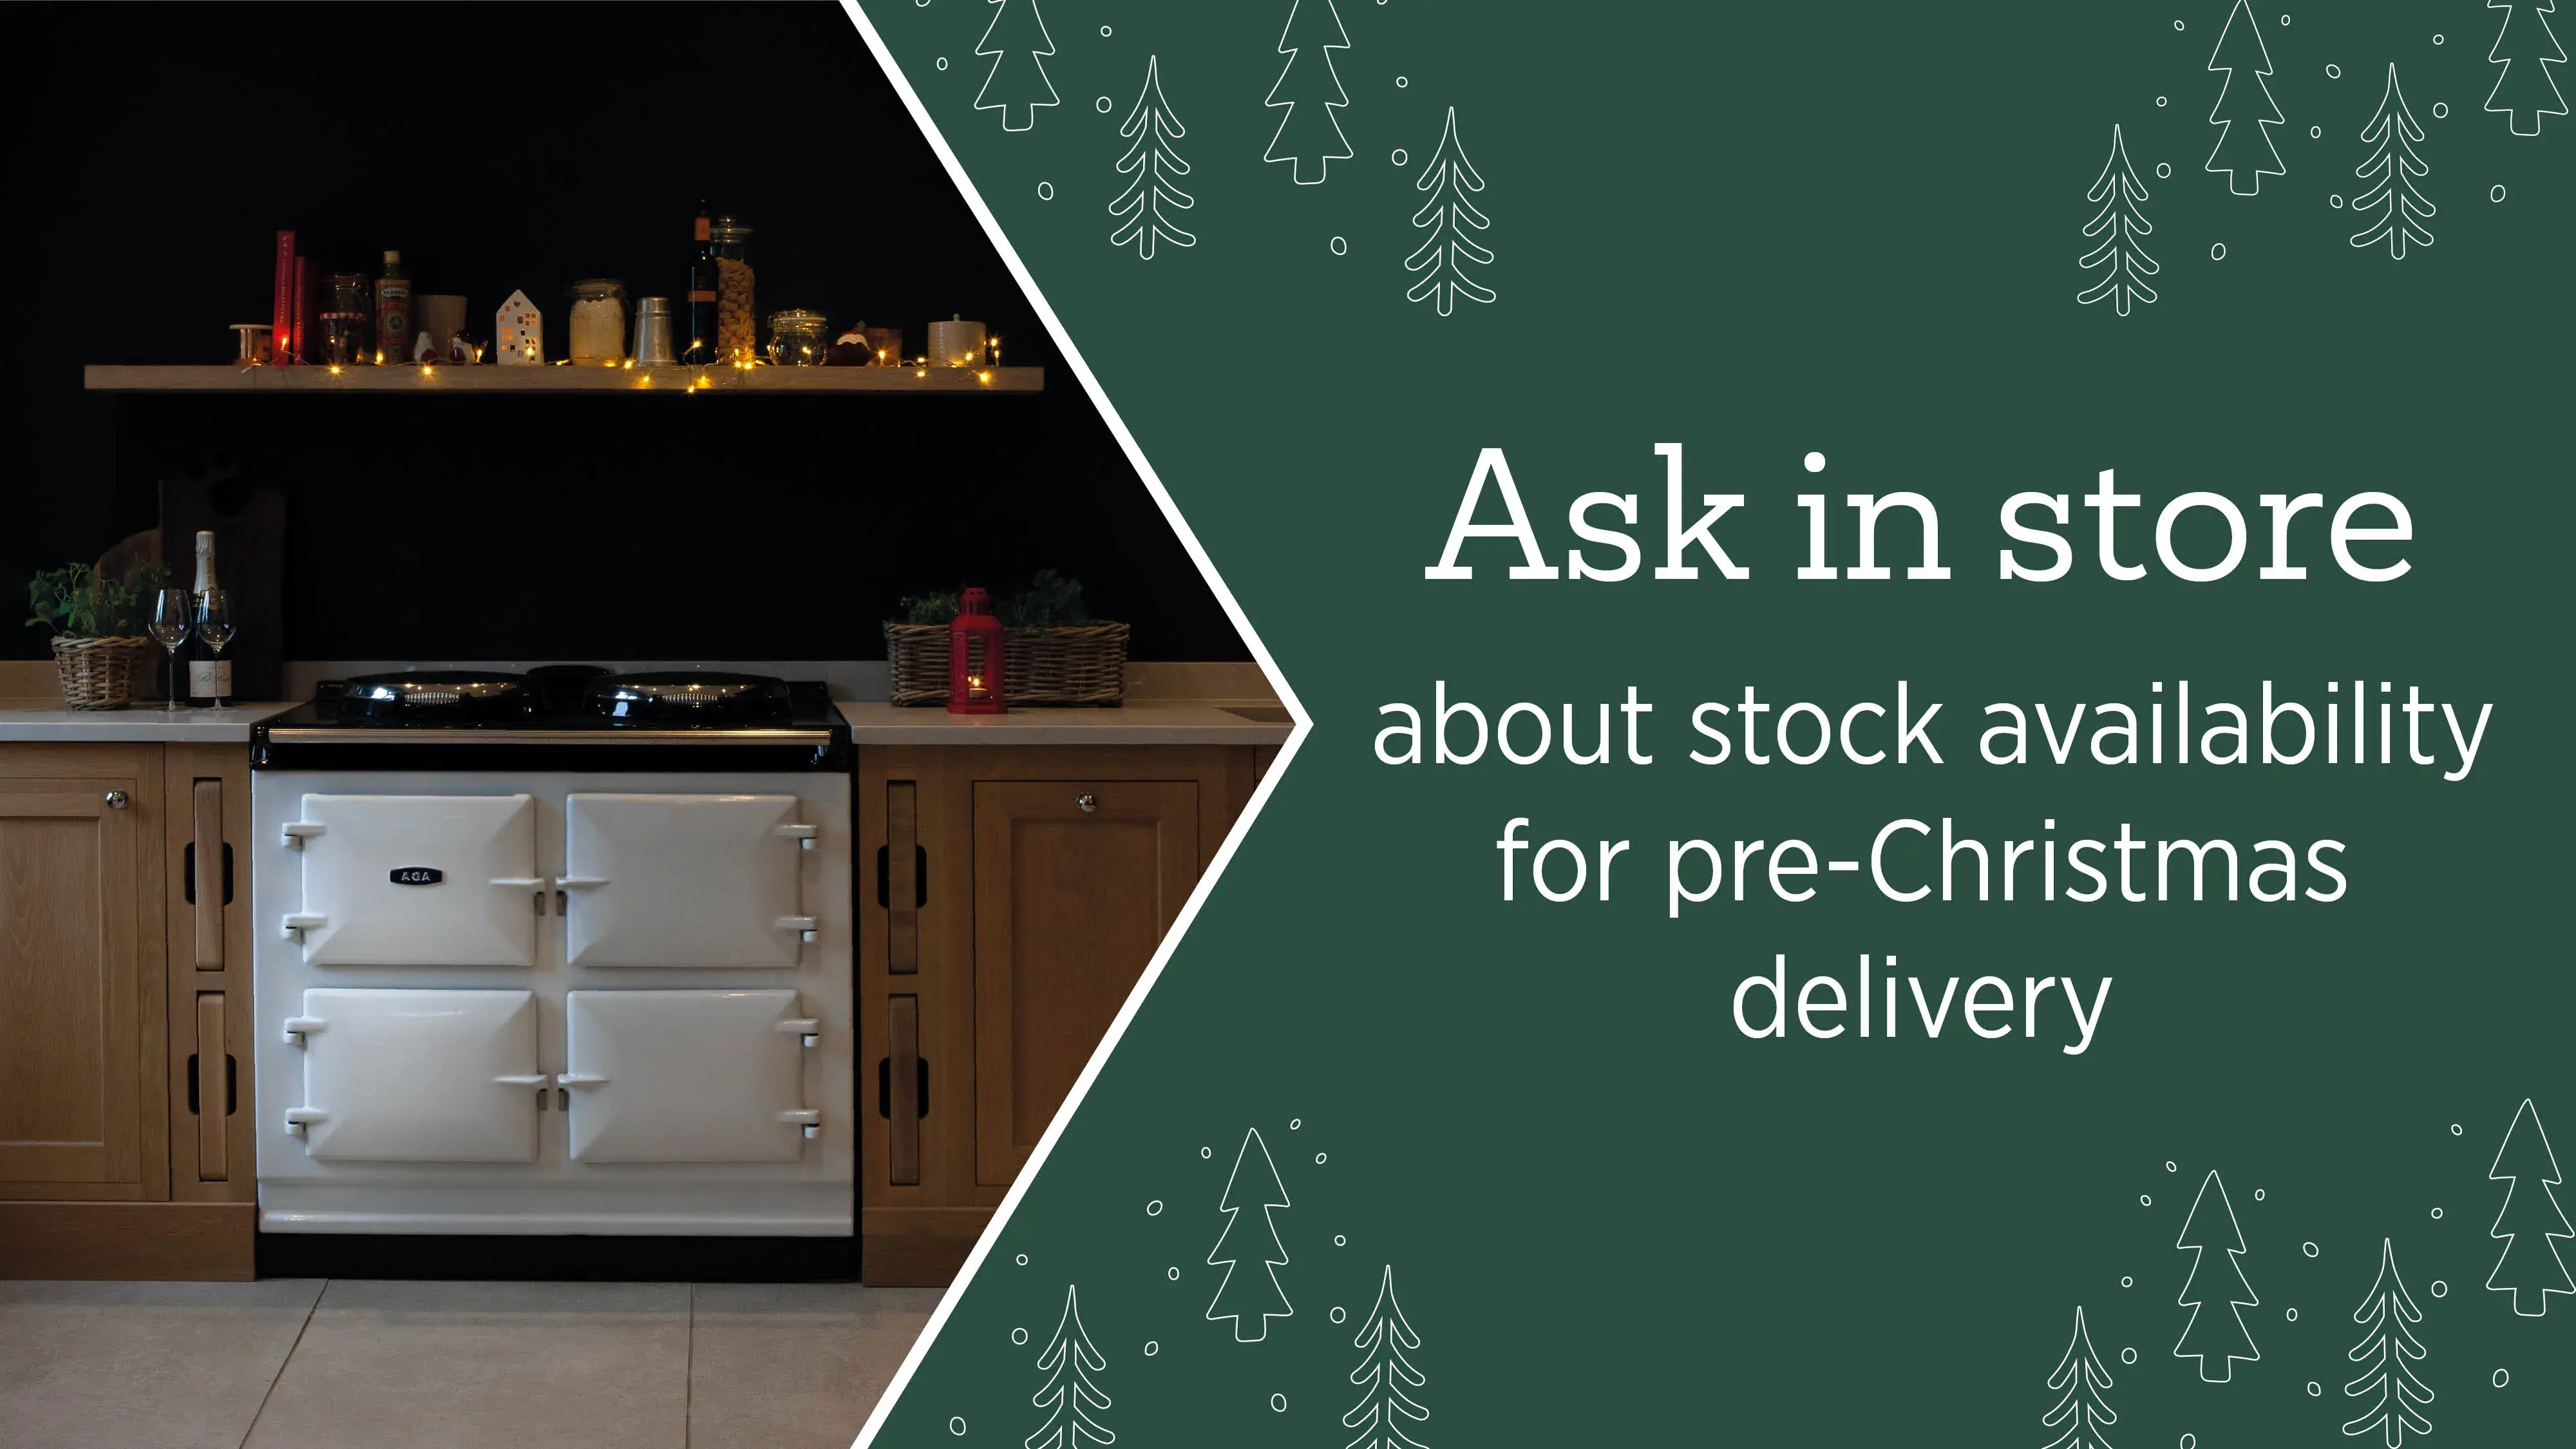 Ask in store about stock availability for pre-Christmas delivery